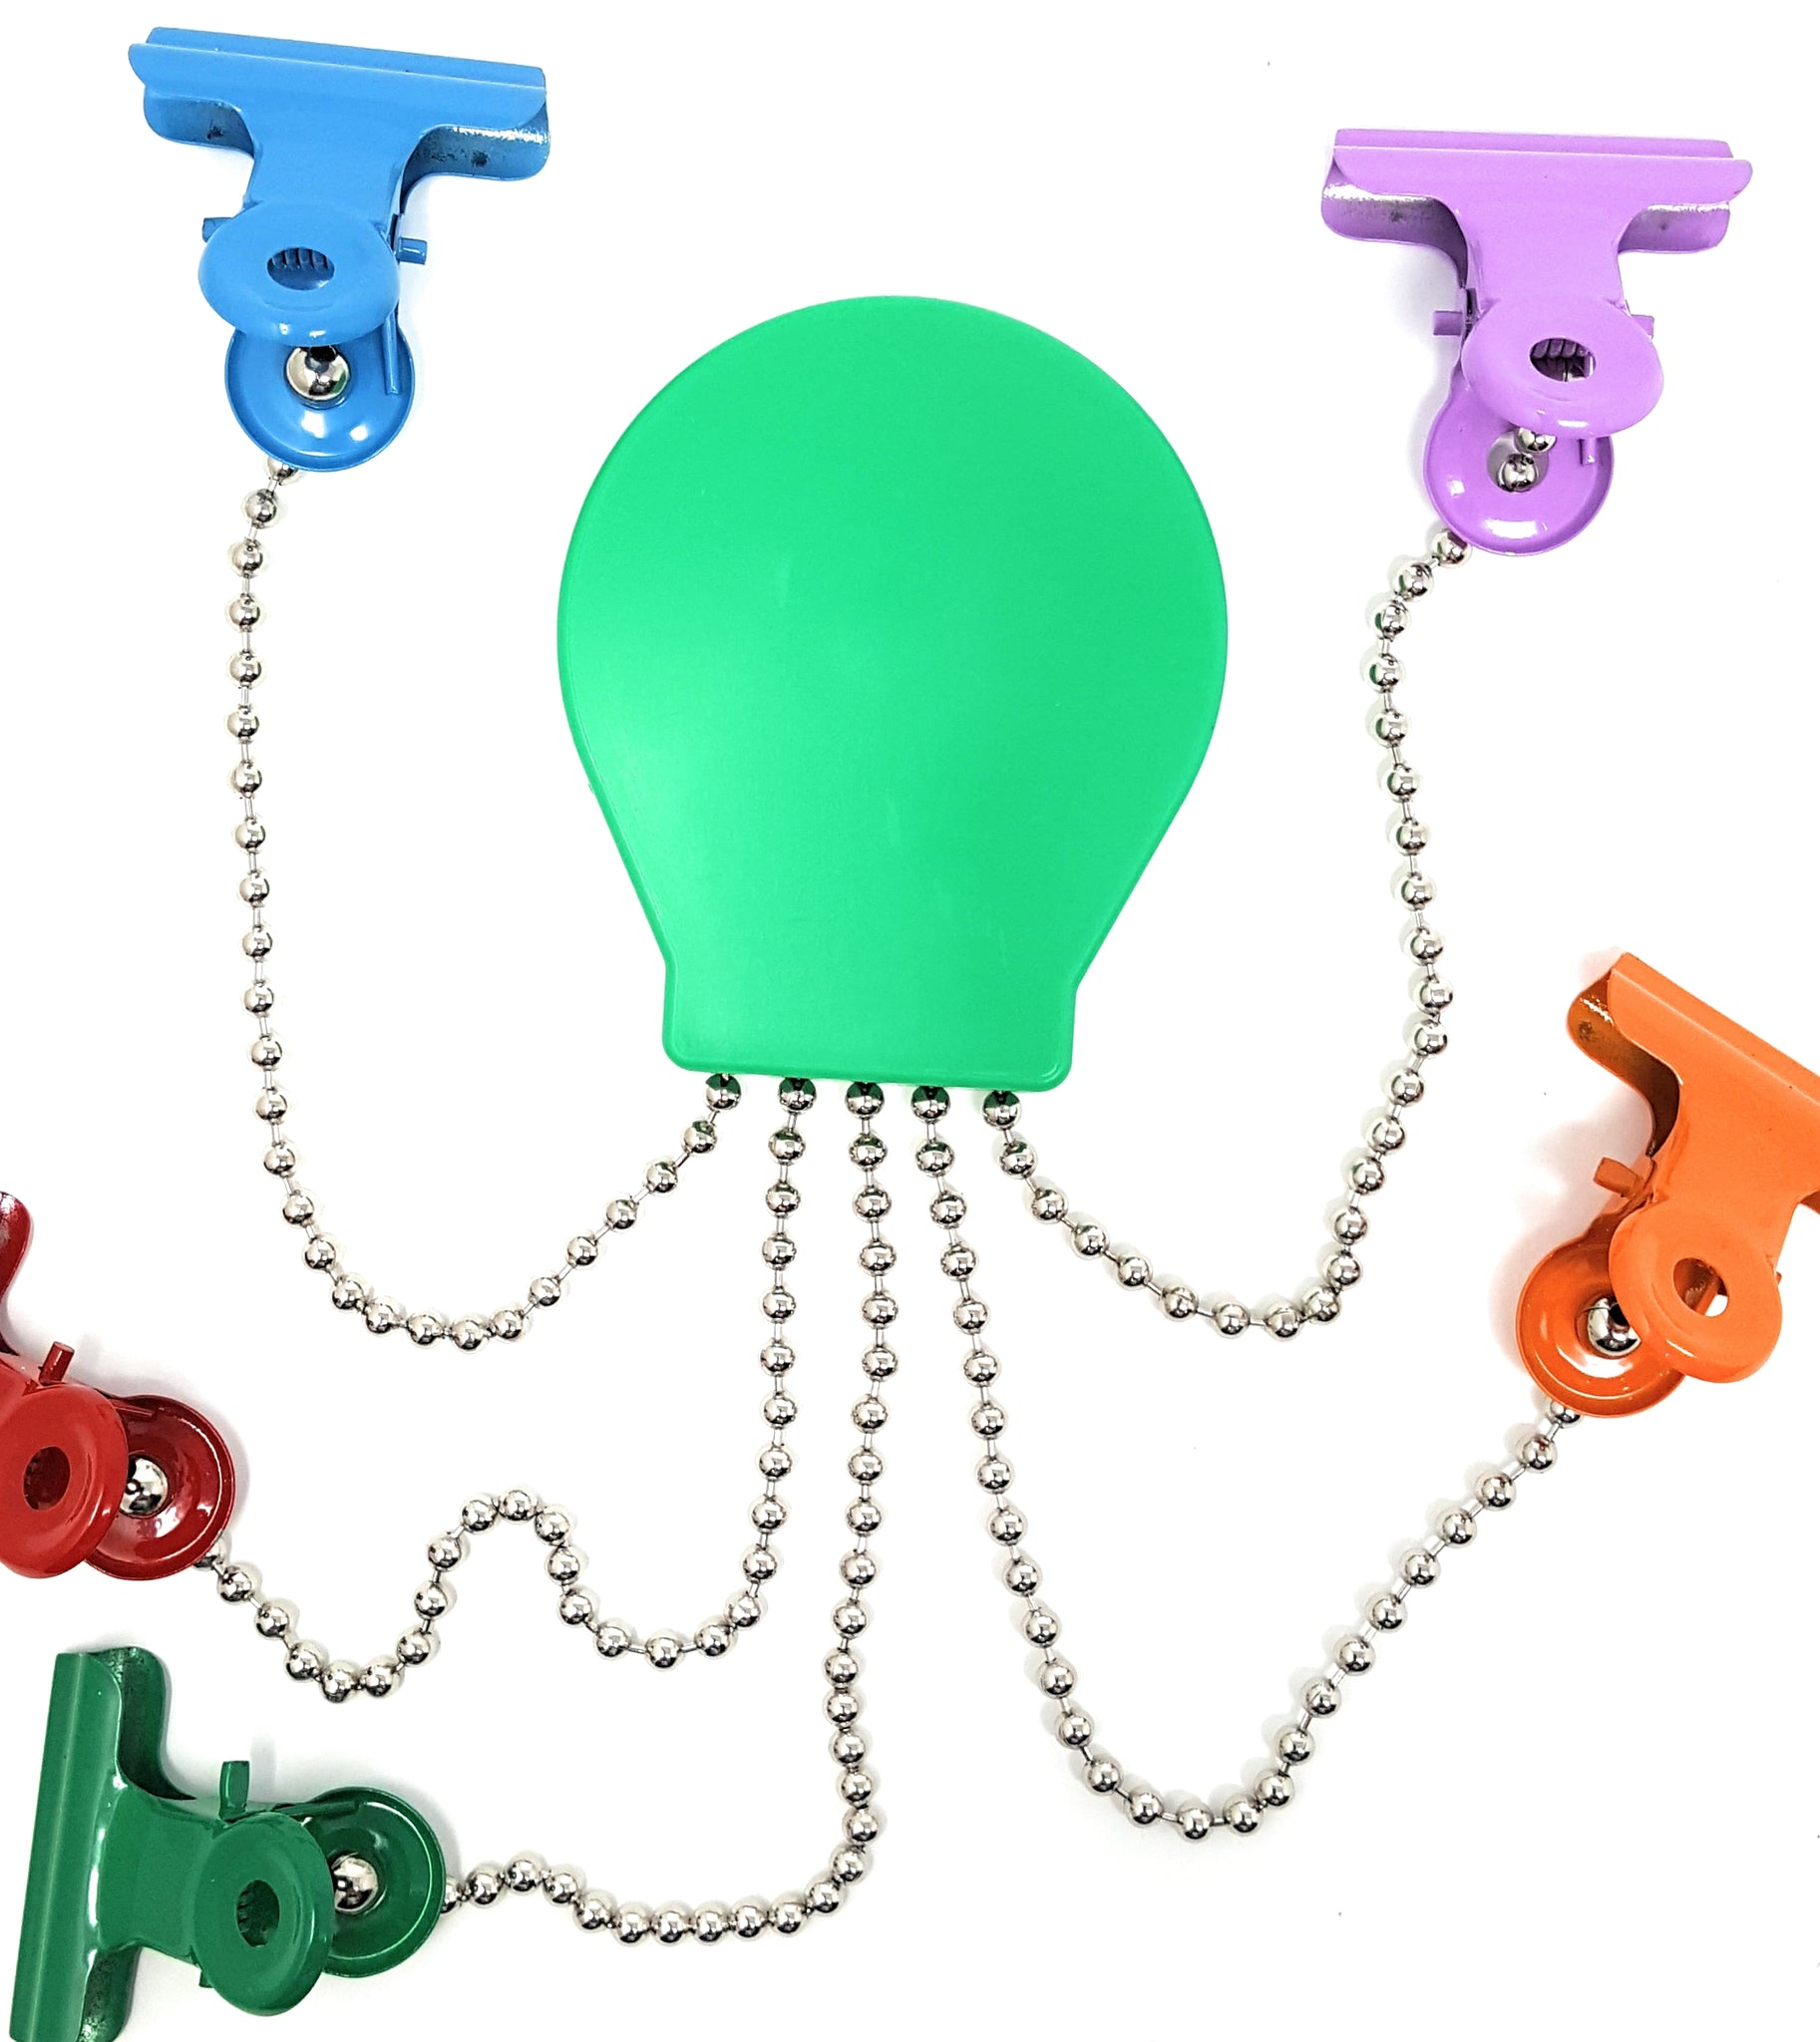 OctoClip Refrigerator Magnet – Solid Green with Multicolored Clips